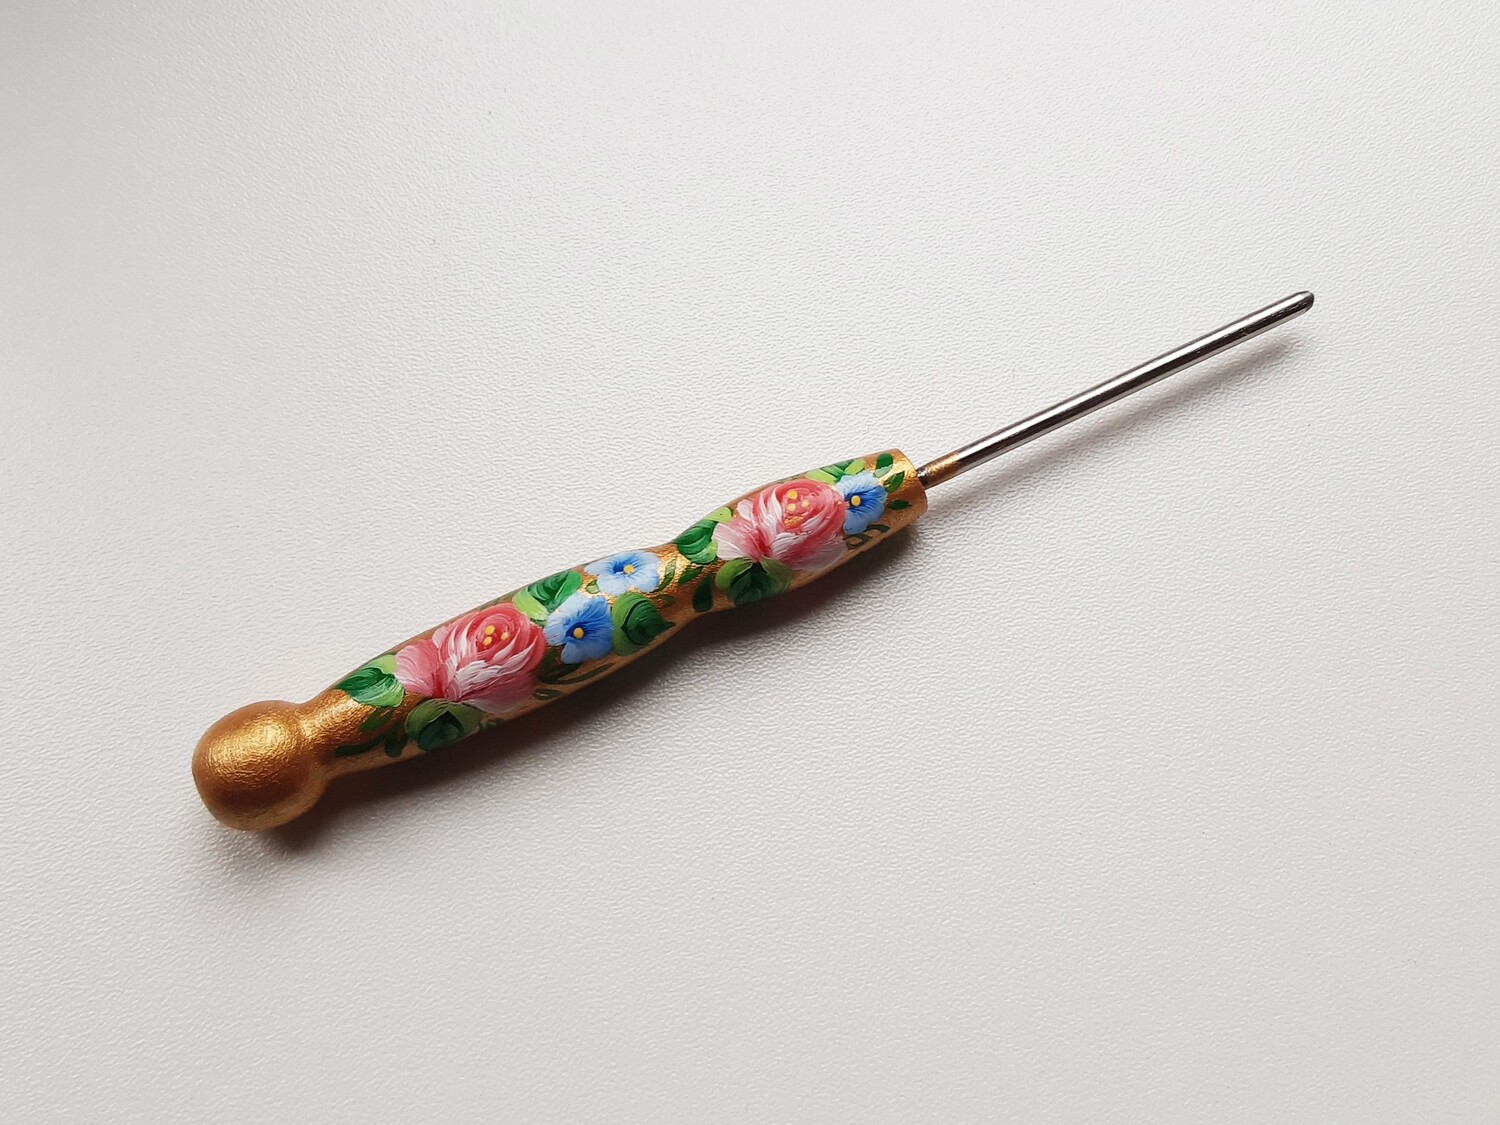 A Tool Used to Make Picots Consistent / Picot Gauge 2.6 mm Painted Zhostovo on Gold